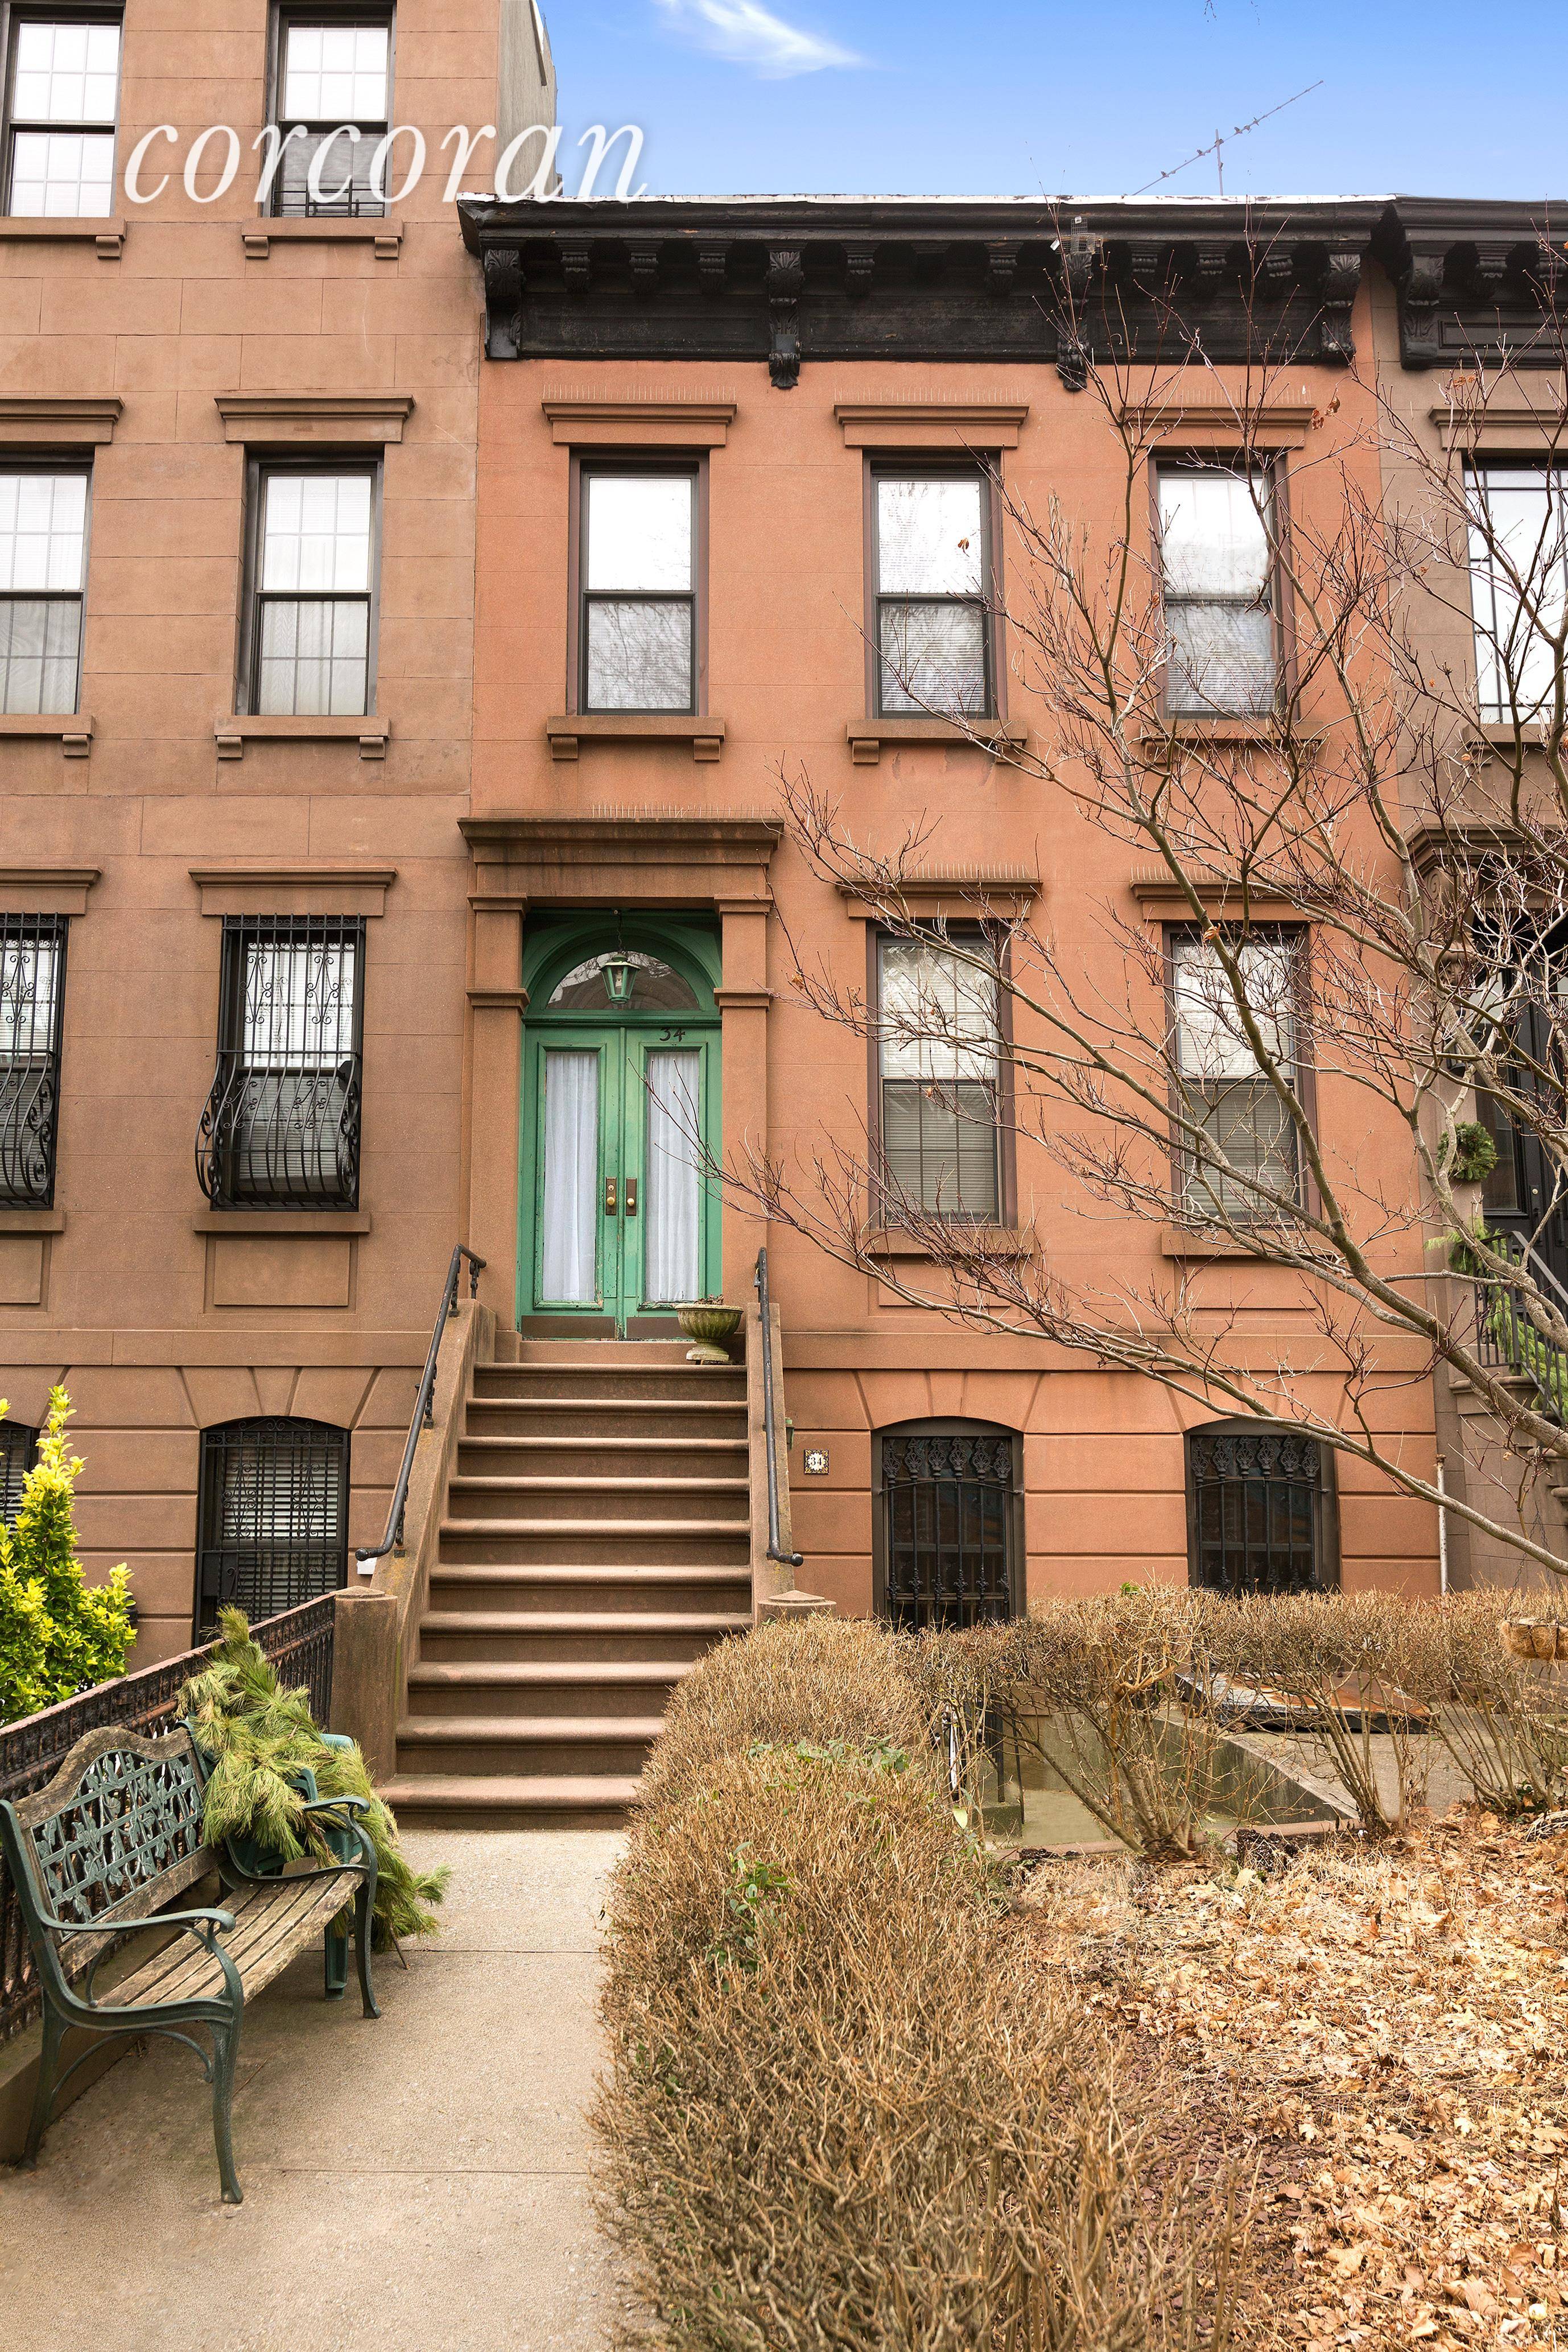 Located on one of Carroll Gardens most coveted garden blocks, this 20 foot wide home stands 3 stories plus a basement.